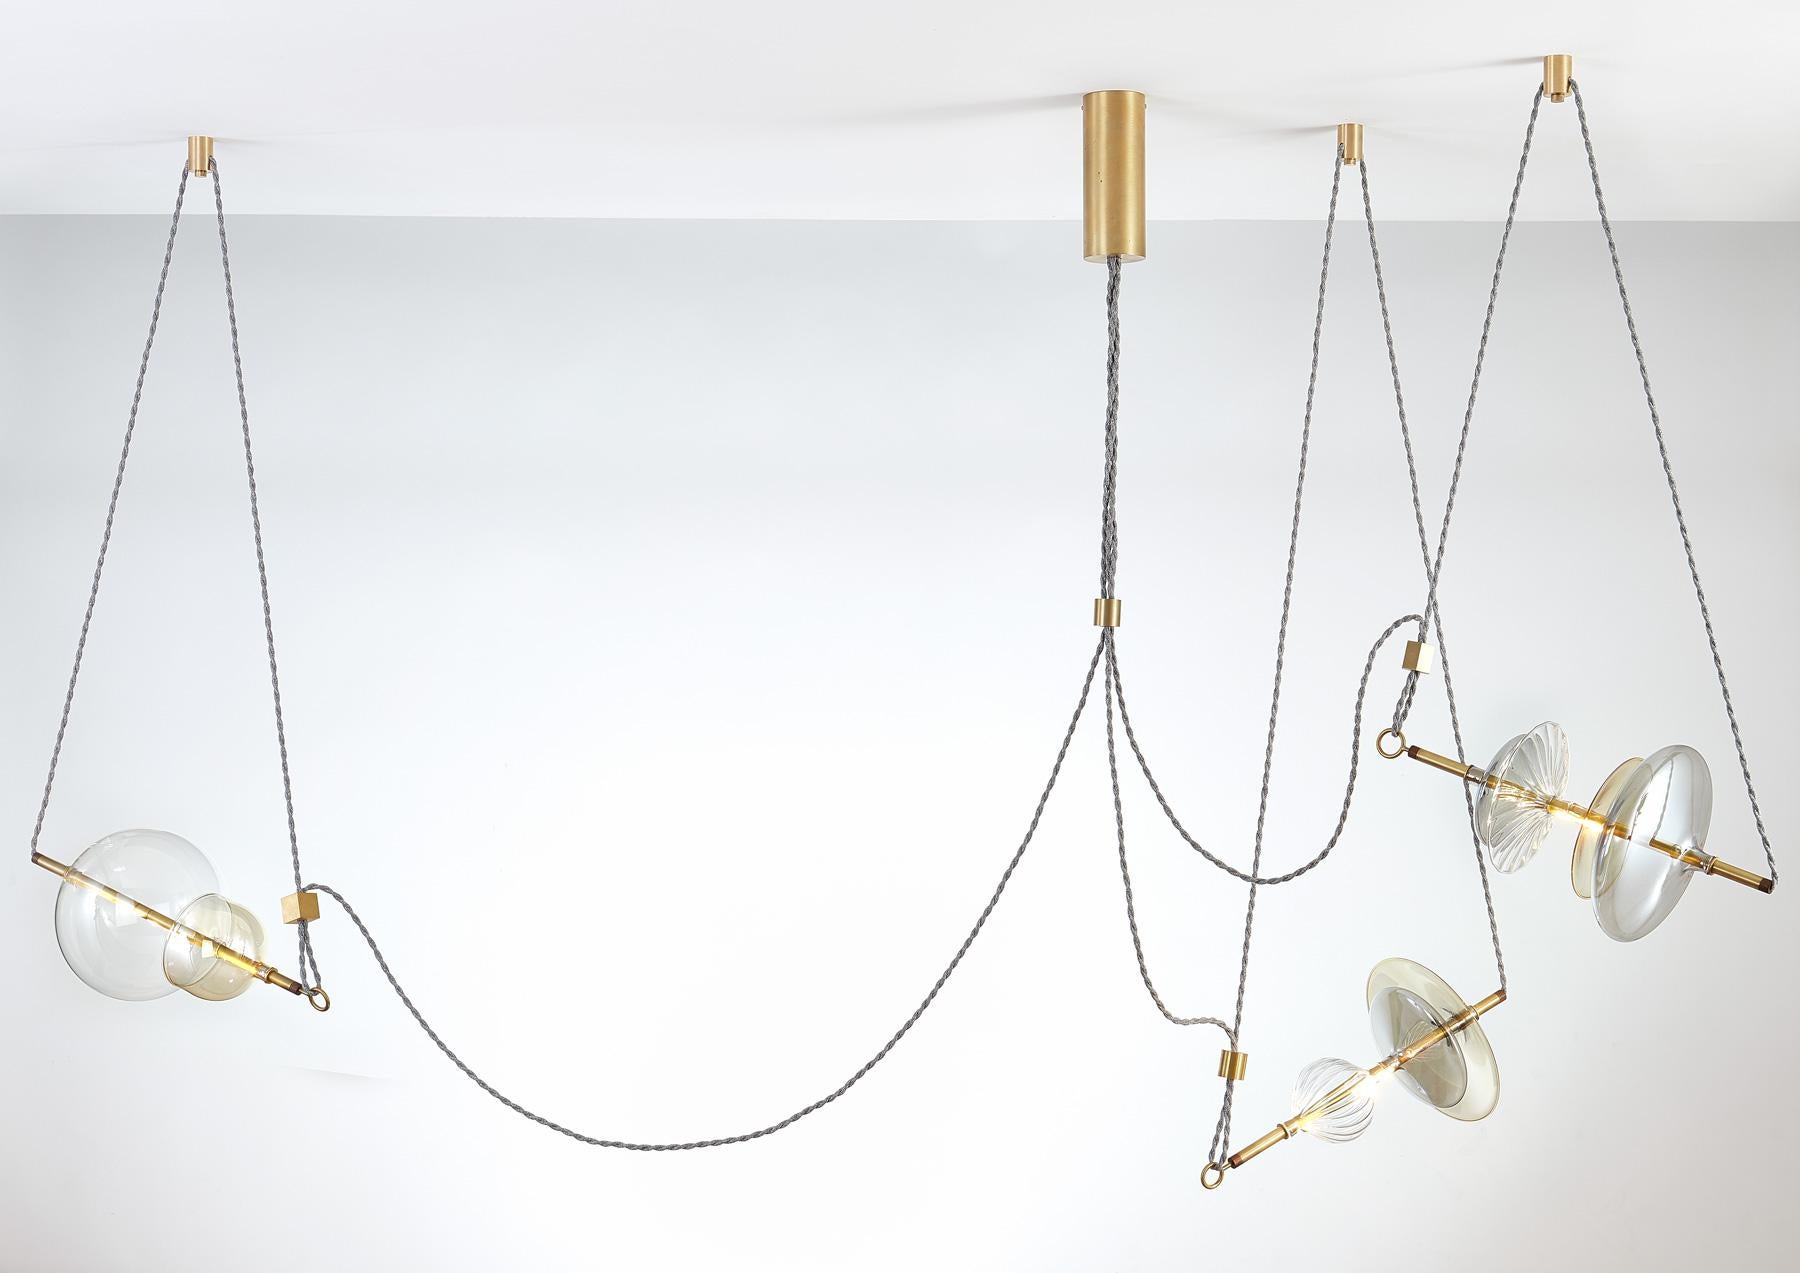 The Trapezi contemporary chandelier is inspired by the IDEA of a Circus Trapeze Artist.

Hand blown glass in a variety of forms and colors is combined with brass bars and hung by Linen Cords from hub units on the ceiling.
The glass is left